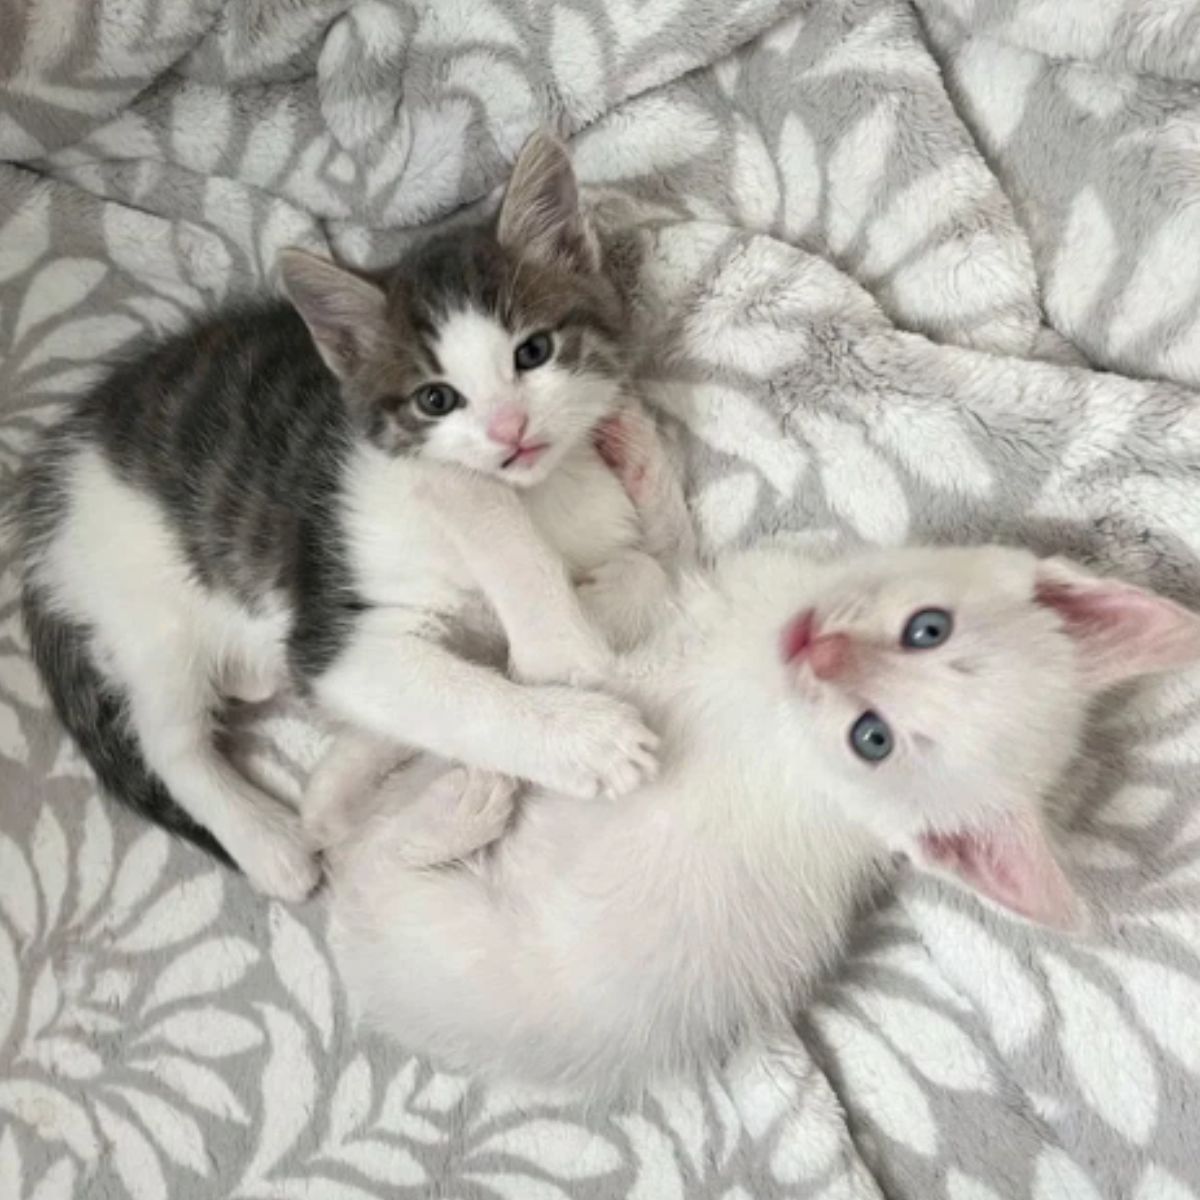 two sweet kittens looking up